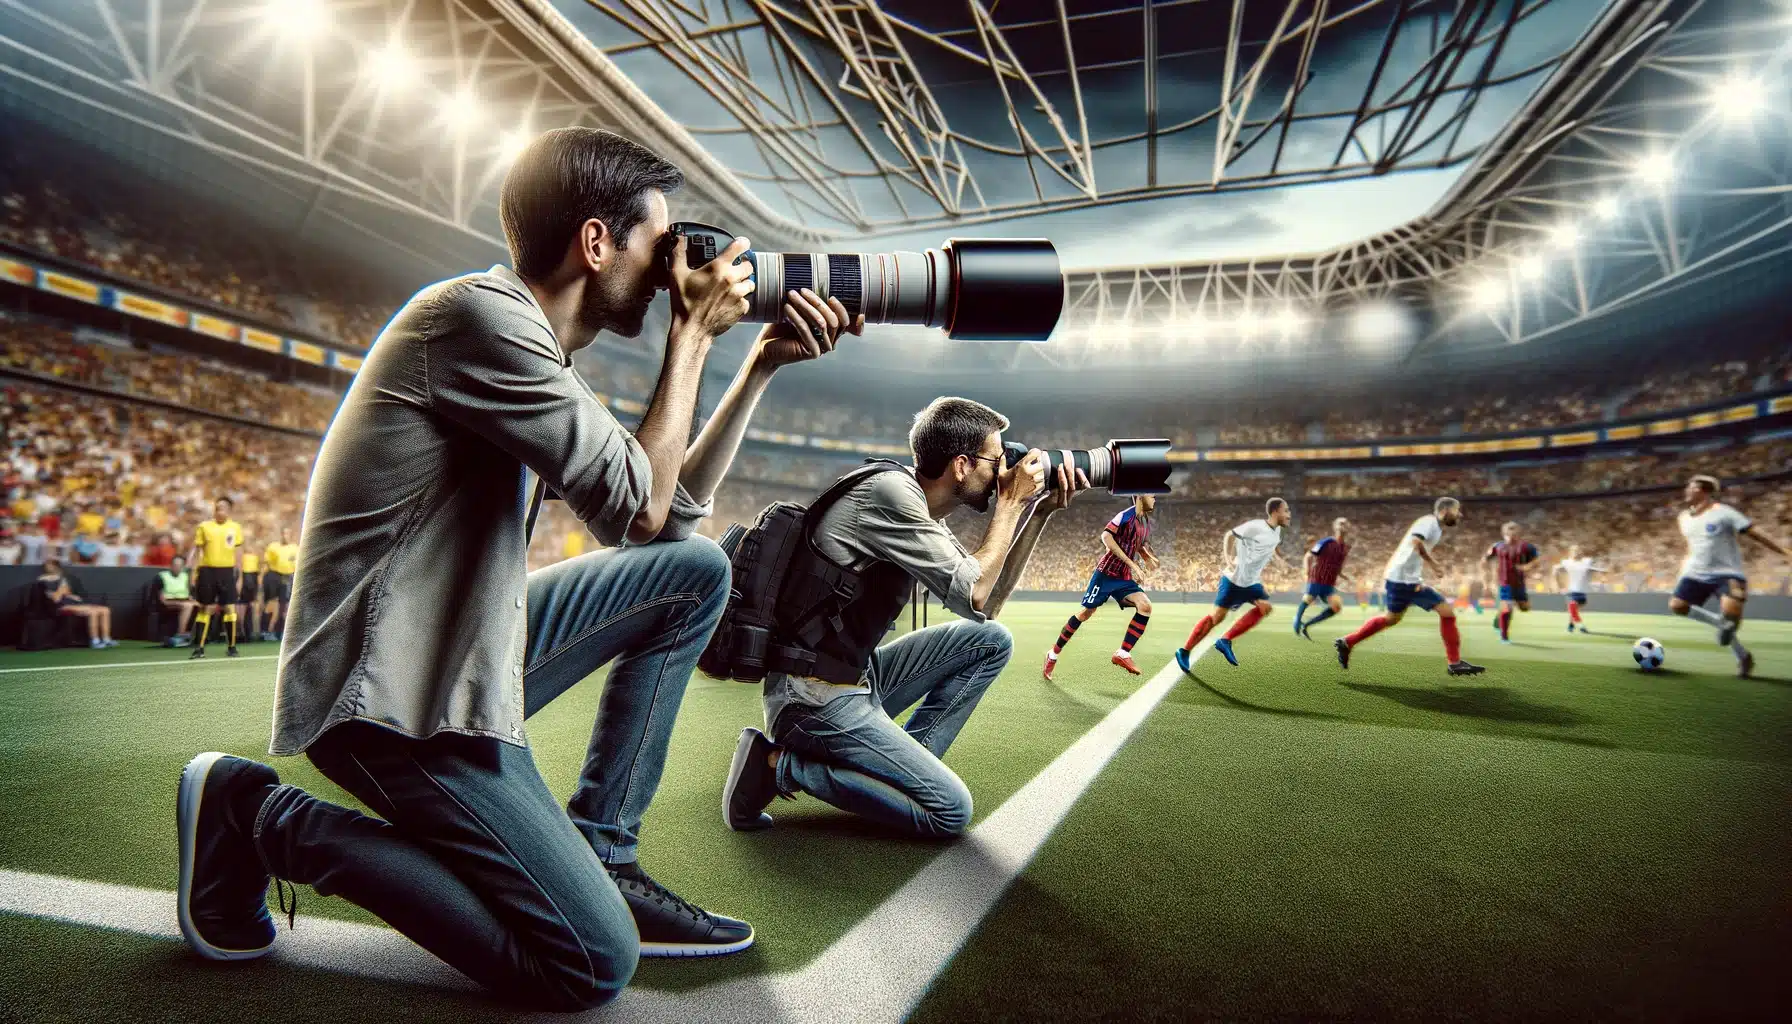 Two professional photographers using different cameras to capture the intense action of a soccer game at a packed stadium.